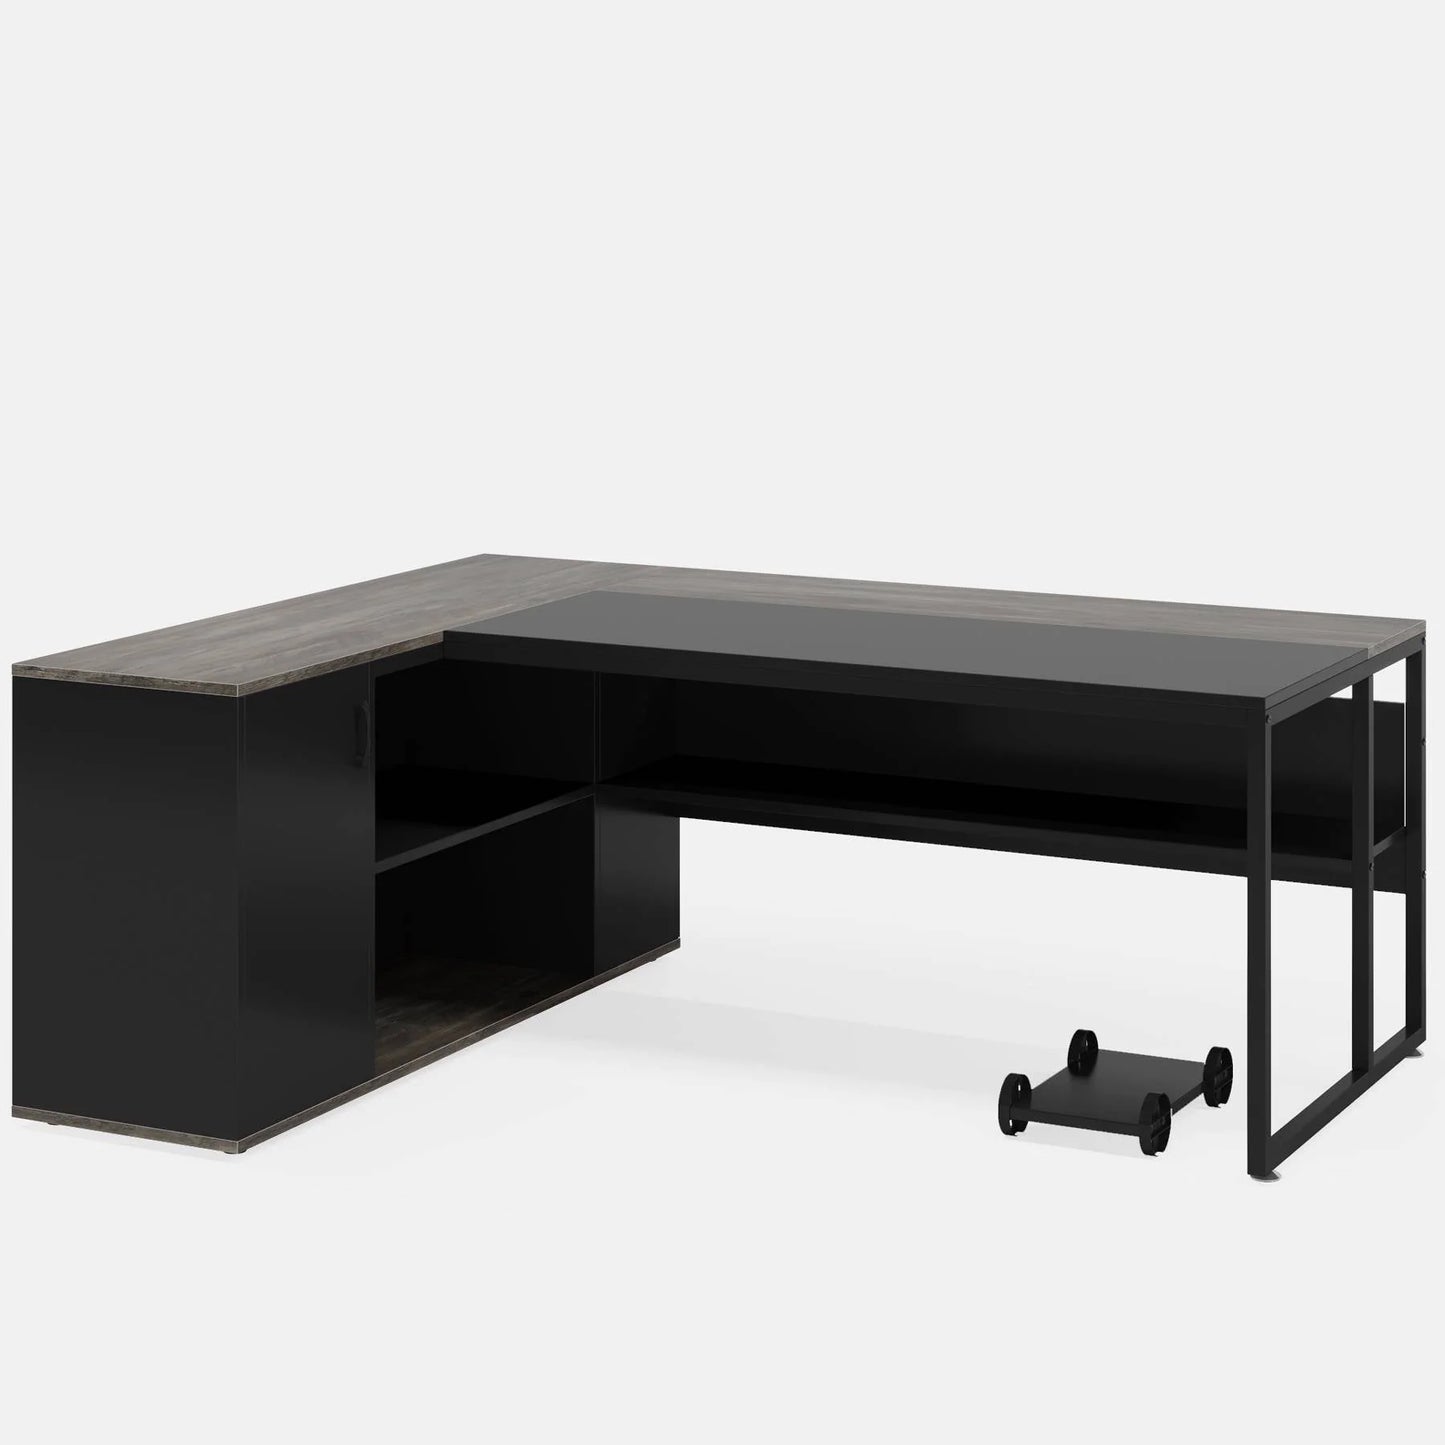 71 inch Executive Desk, L-Shaped Computer Desk with Storage Cabinet